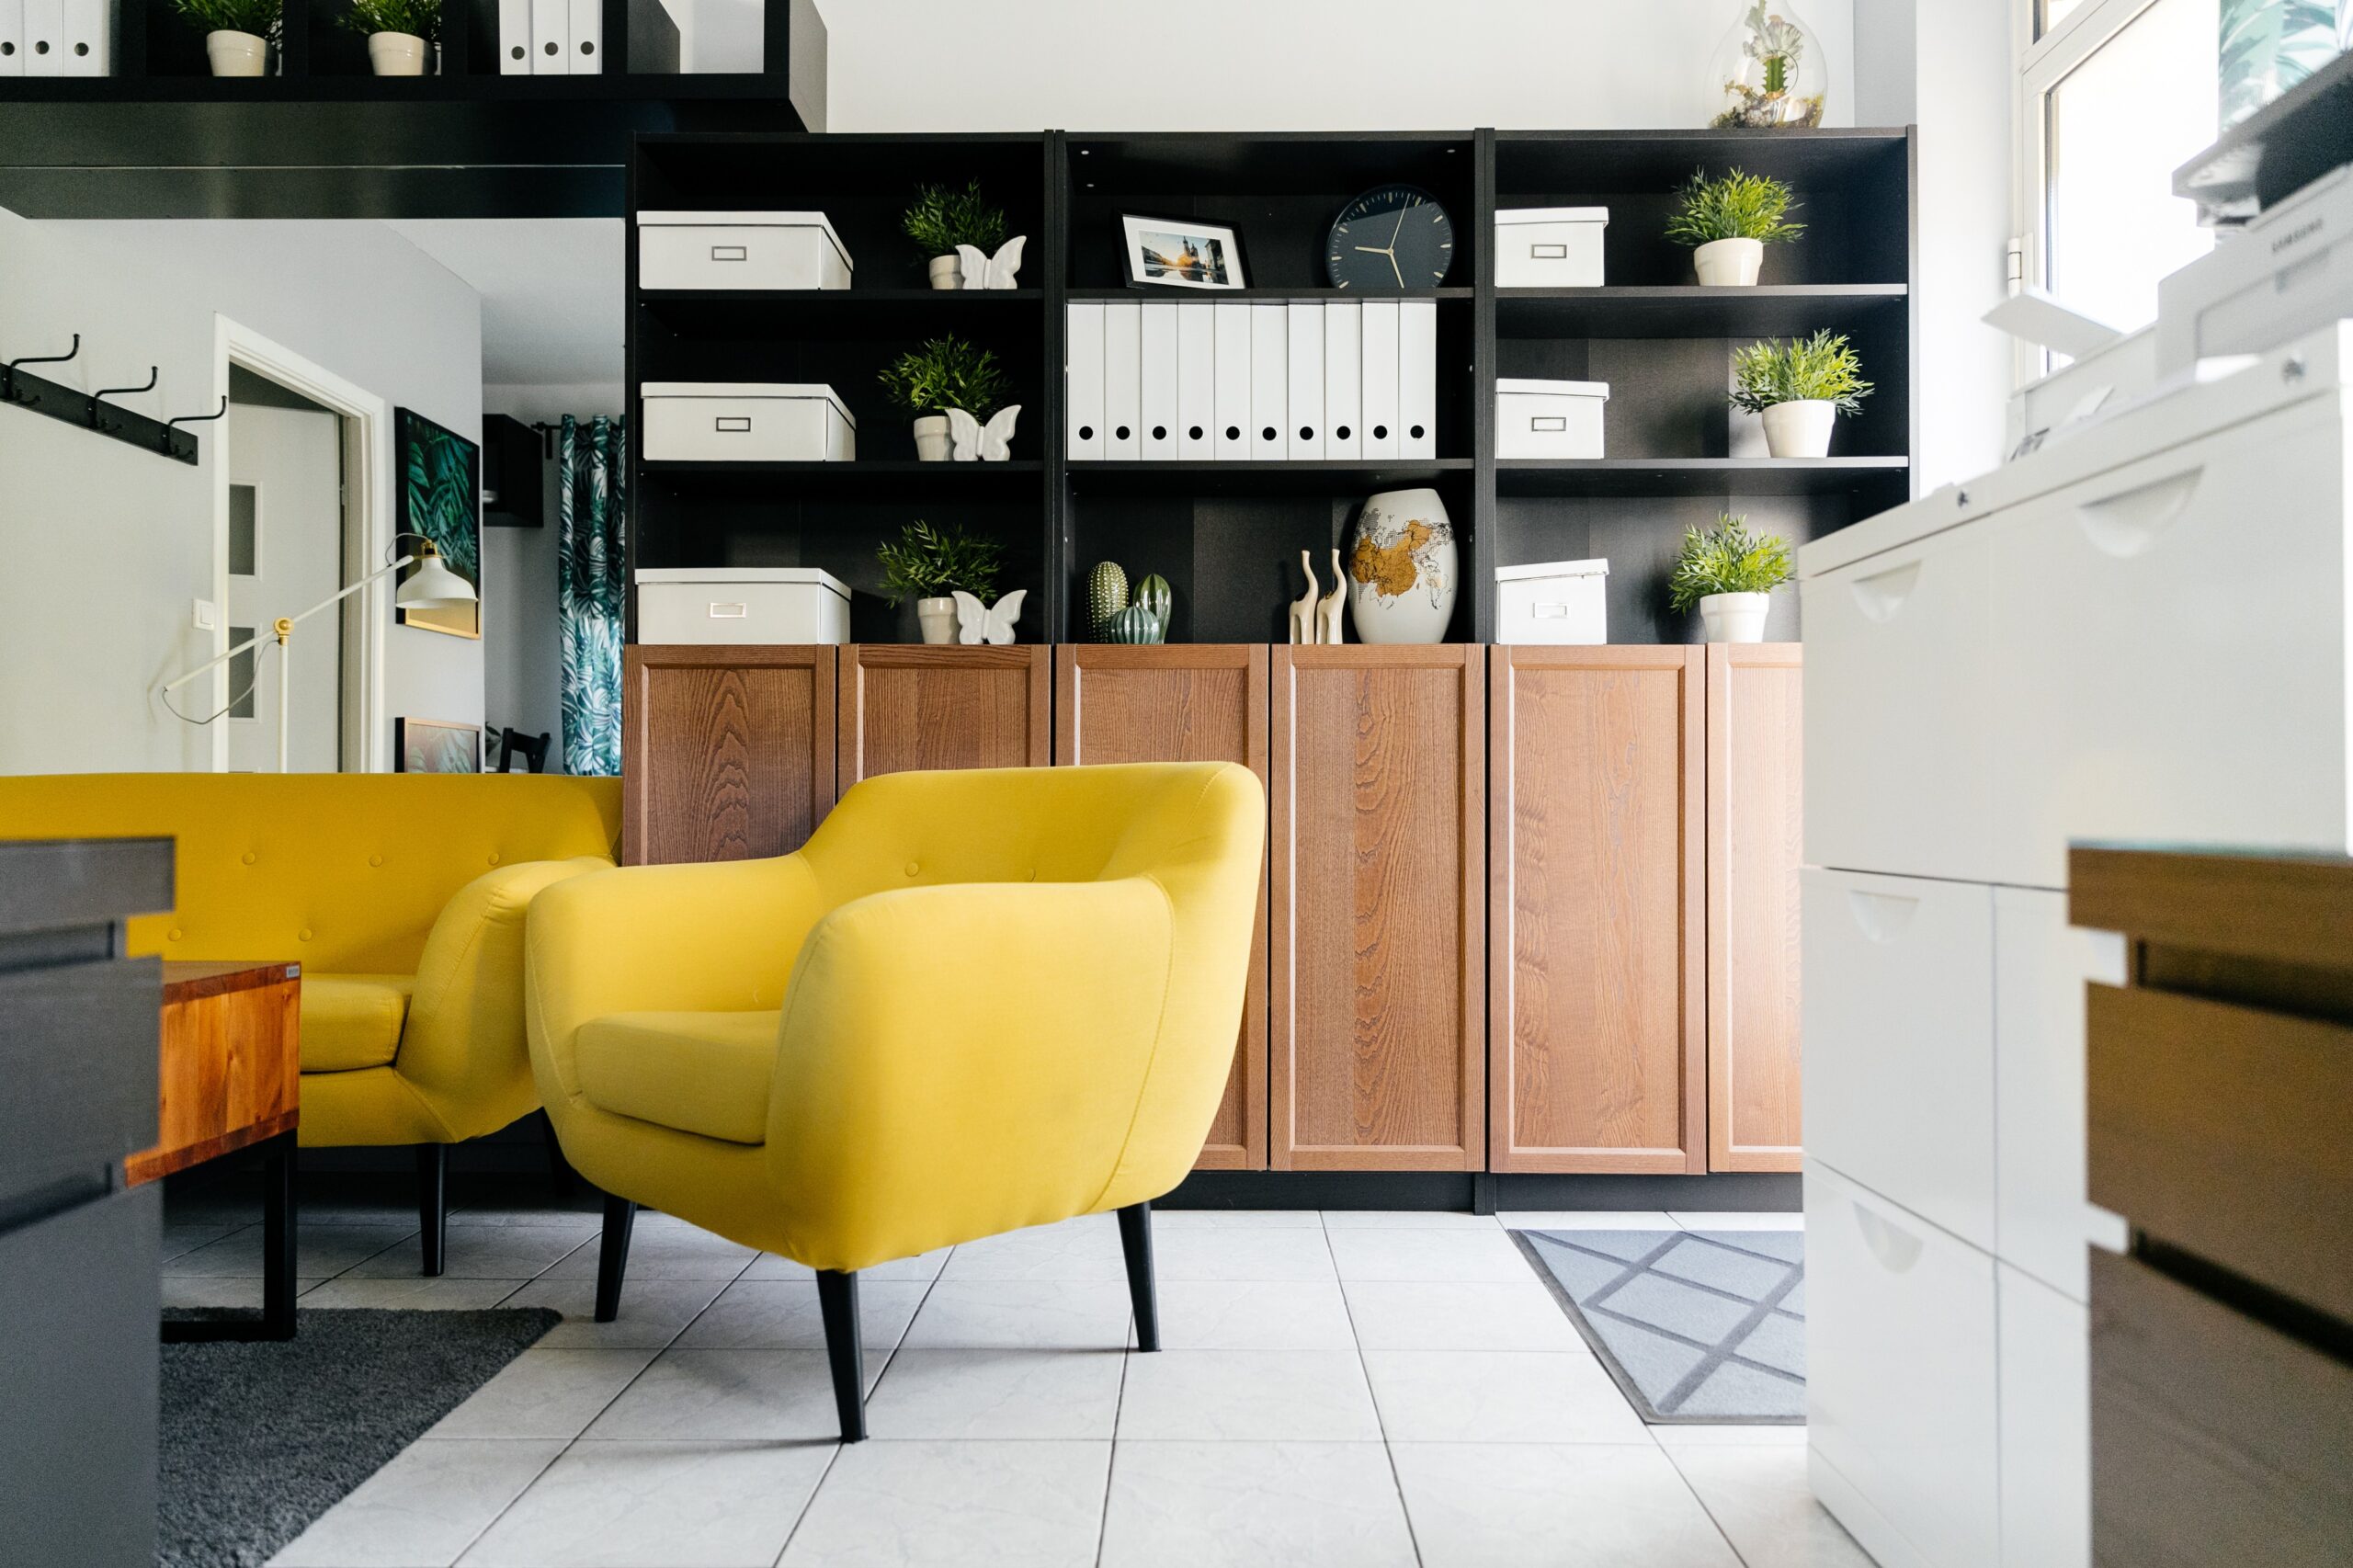 6 Furniture Ideas to Inspire Your Office Fit Out